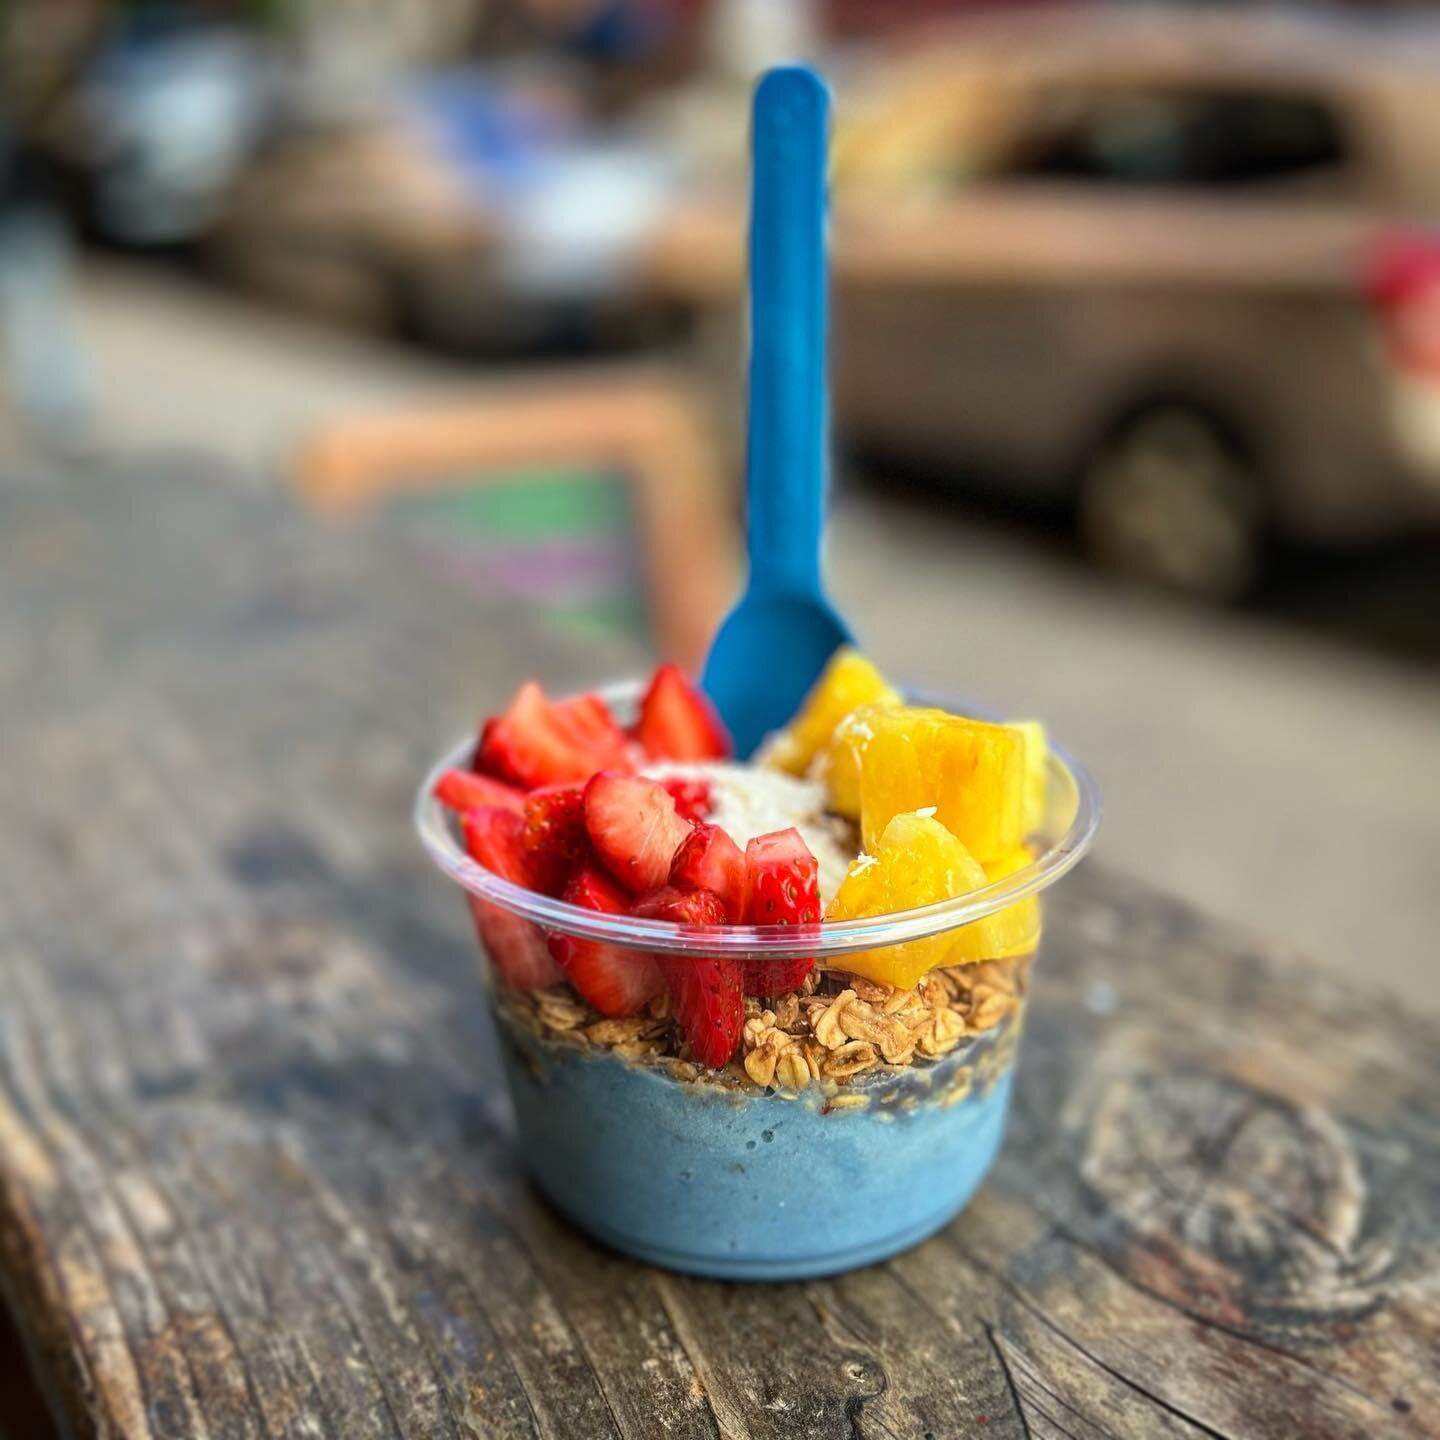 Have a BL💙ETIFUL day everyone!!

📍 EAST VILLAGE
💌 Catering: info@agavijuice.com
✨ 100% Raw 100% Vegan 100% Love
🏳️&zwj;🌈 Proudly serving organic acai bowls &amp; juices!
📸 Tag us in your #AGAVI photos!
.
.
AGAVI JUICE | NYC
#agavijuice 💚 #agav